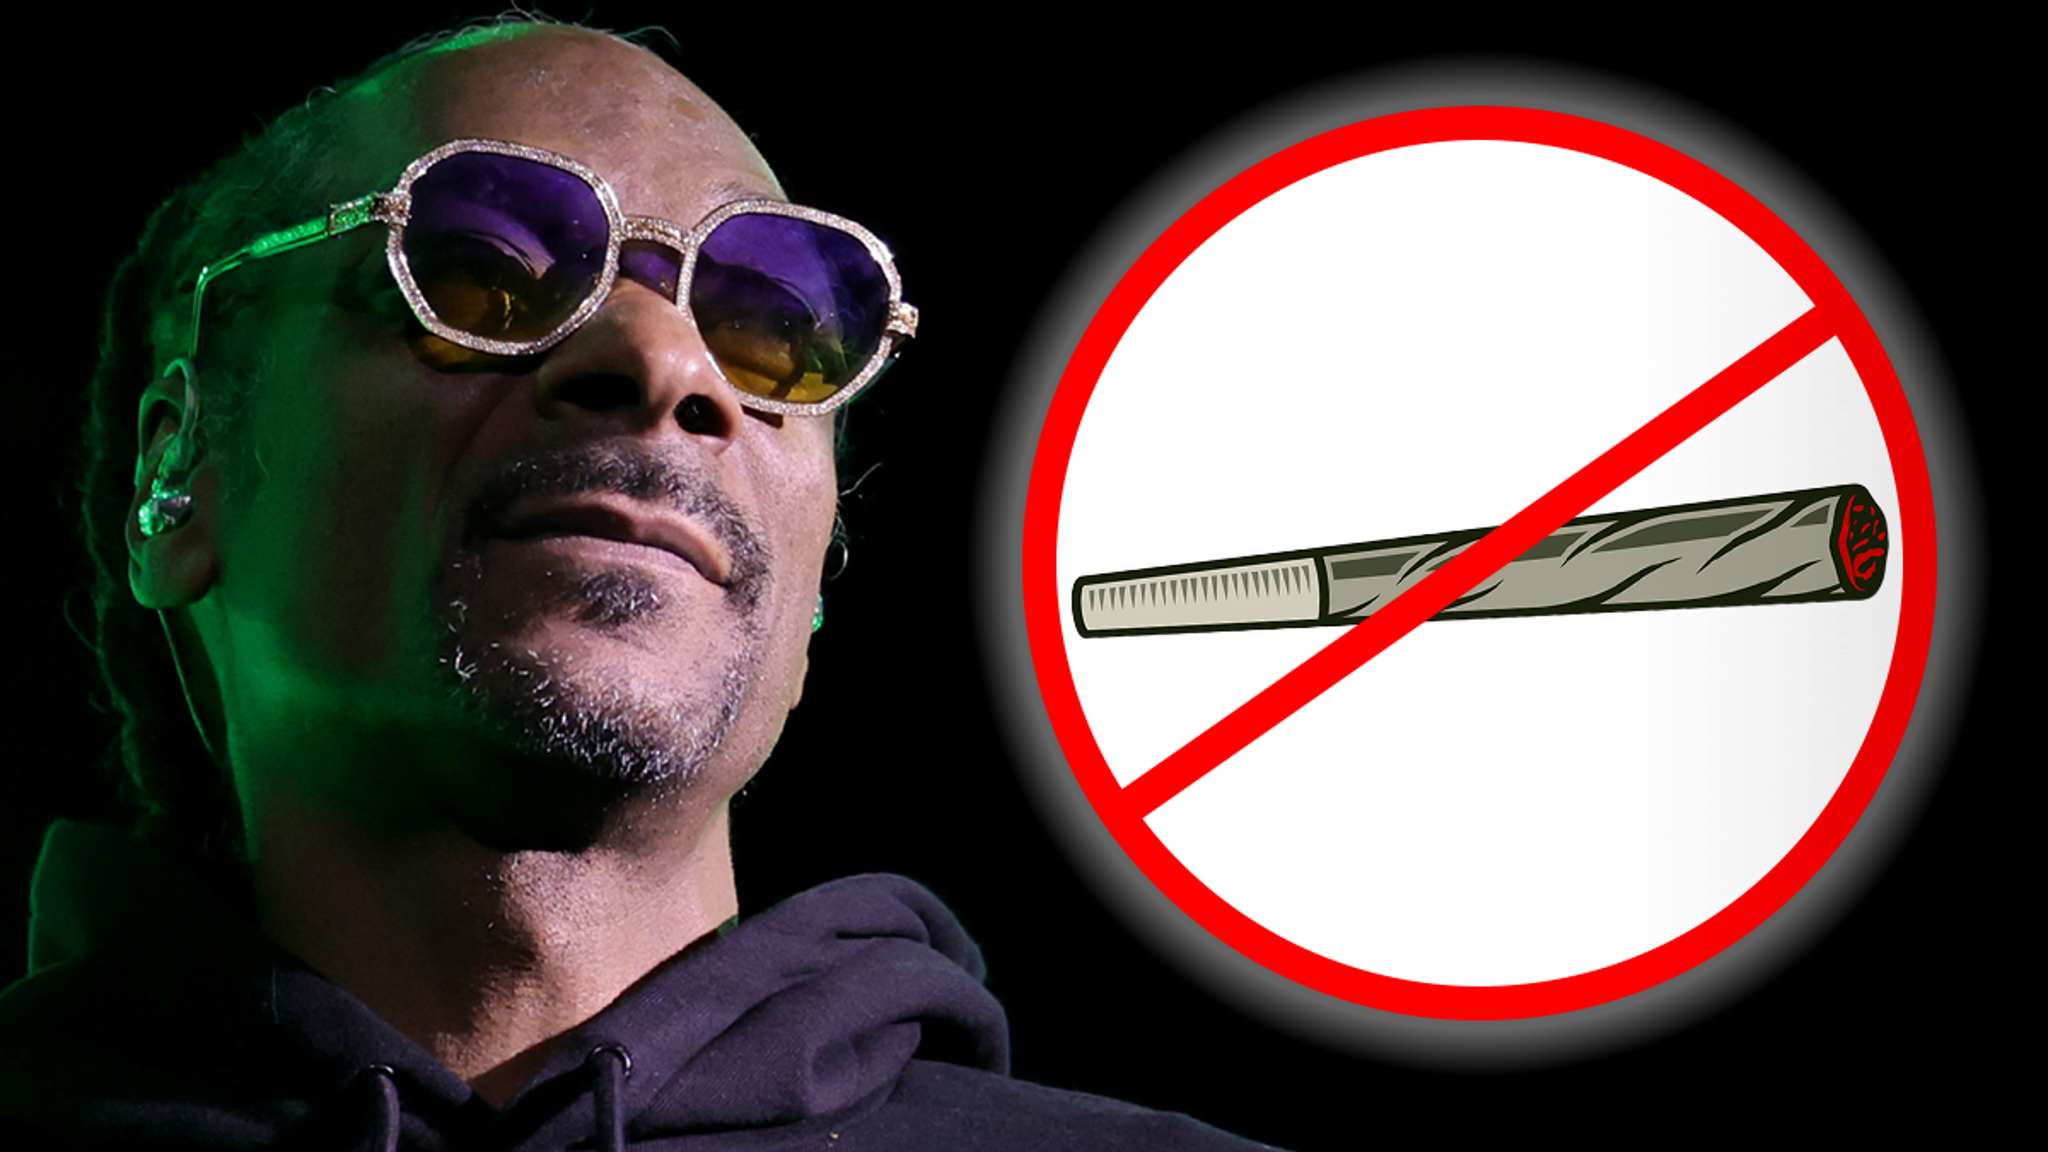 Snoop Dogg Says He’s Giving Up Smoking After Consulting With His Family